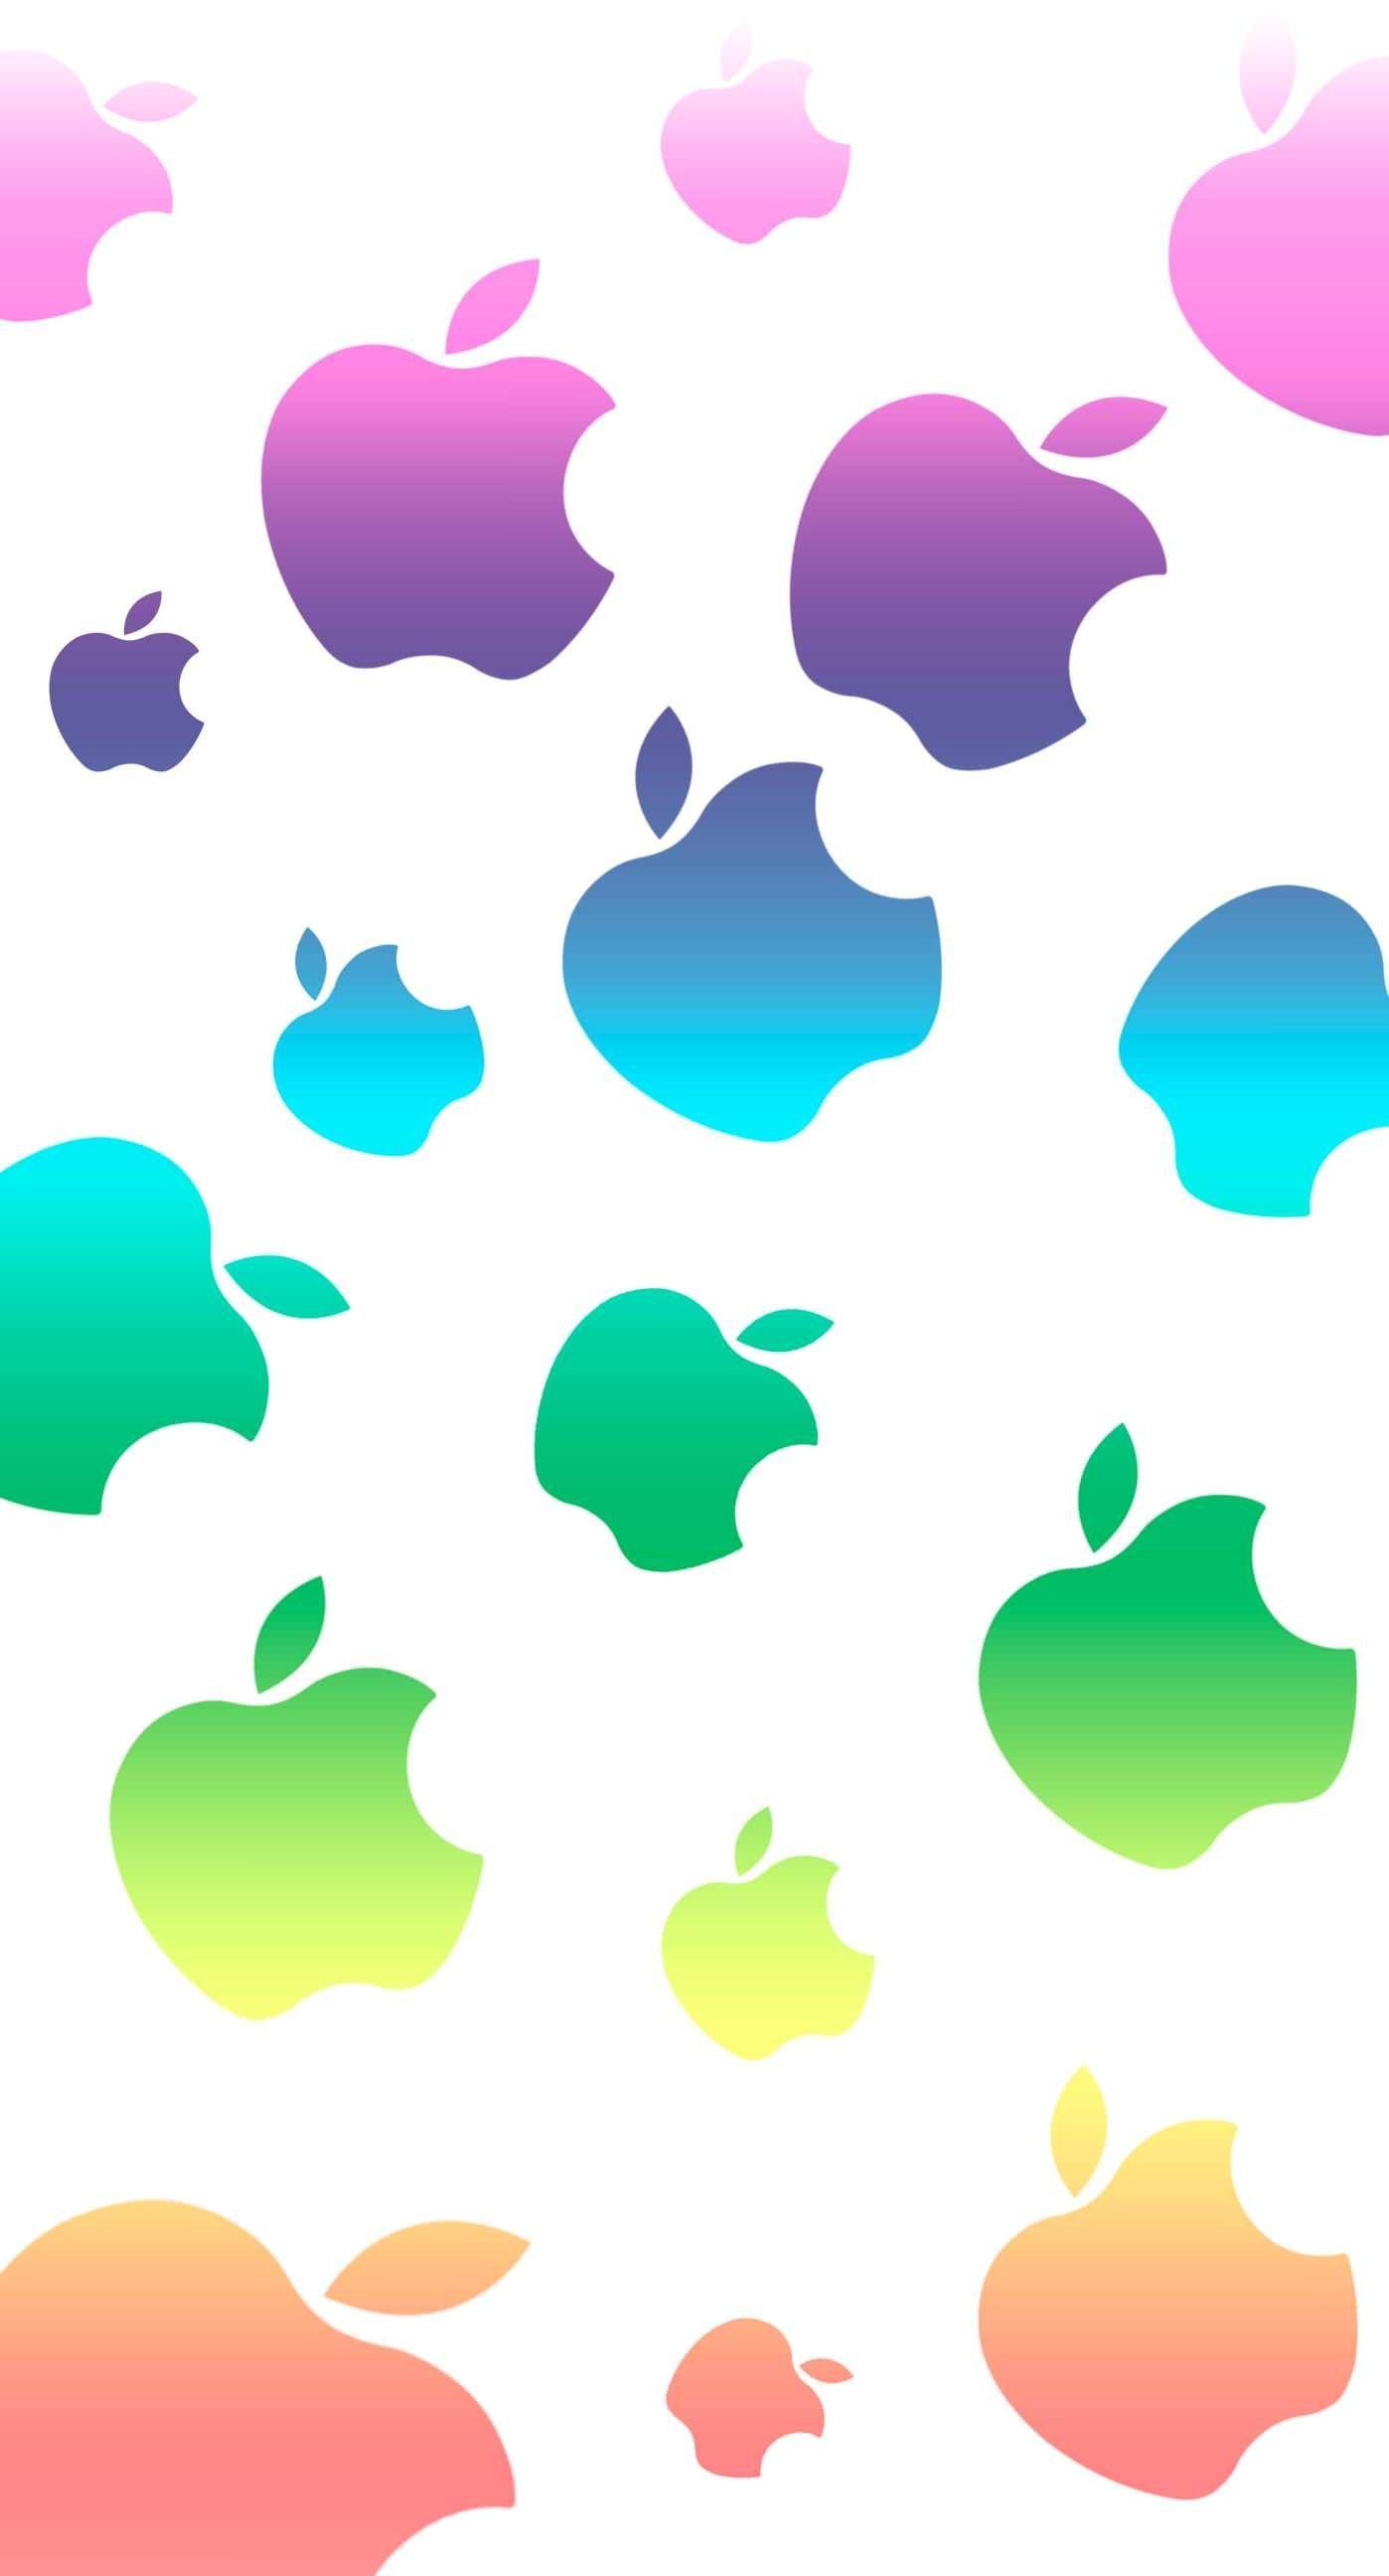 Cute Apple Wallpapers - Top Free Cute Apple Backgrounds - Wallpaperaccess